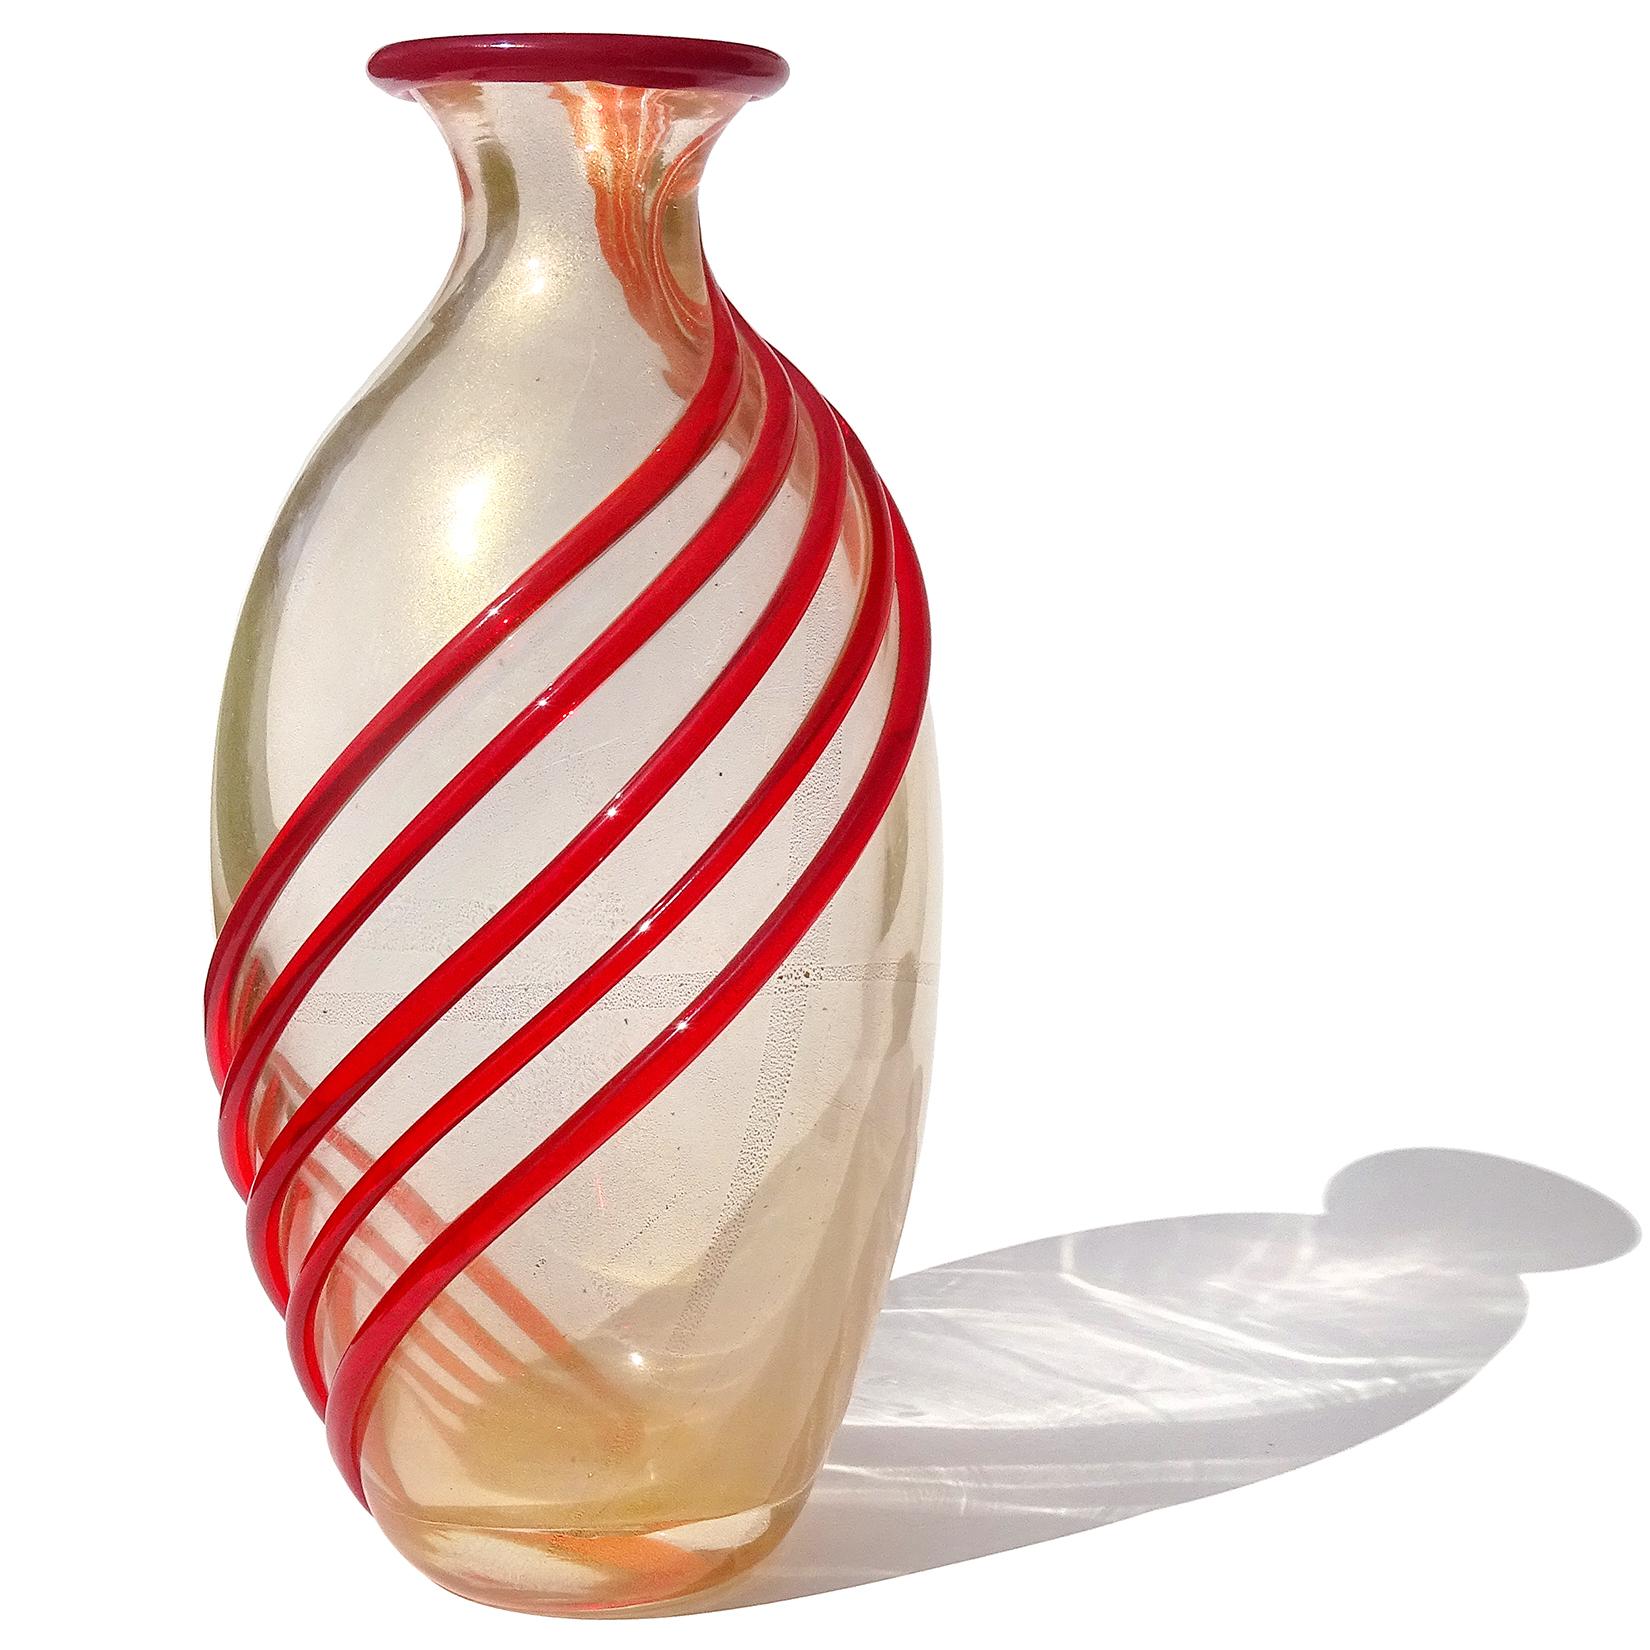 Gorgeous, large vintage Murano hand blown gold flecks with red bands Italian art glass flower vase. Documented to designer Archimede Seguso. The piece is hand signed 